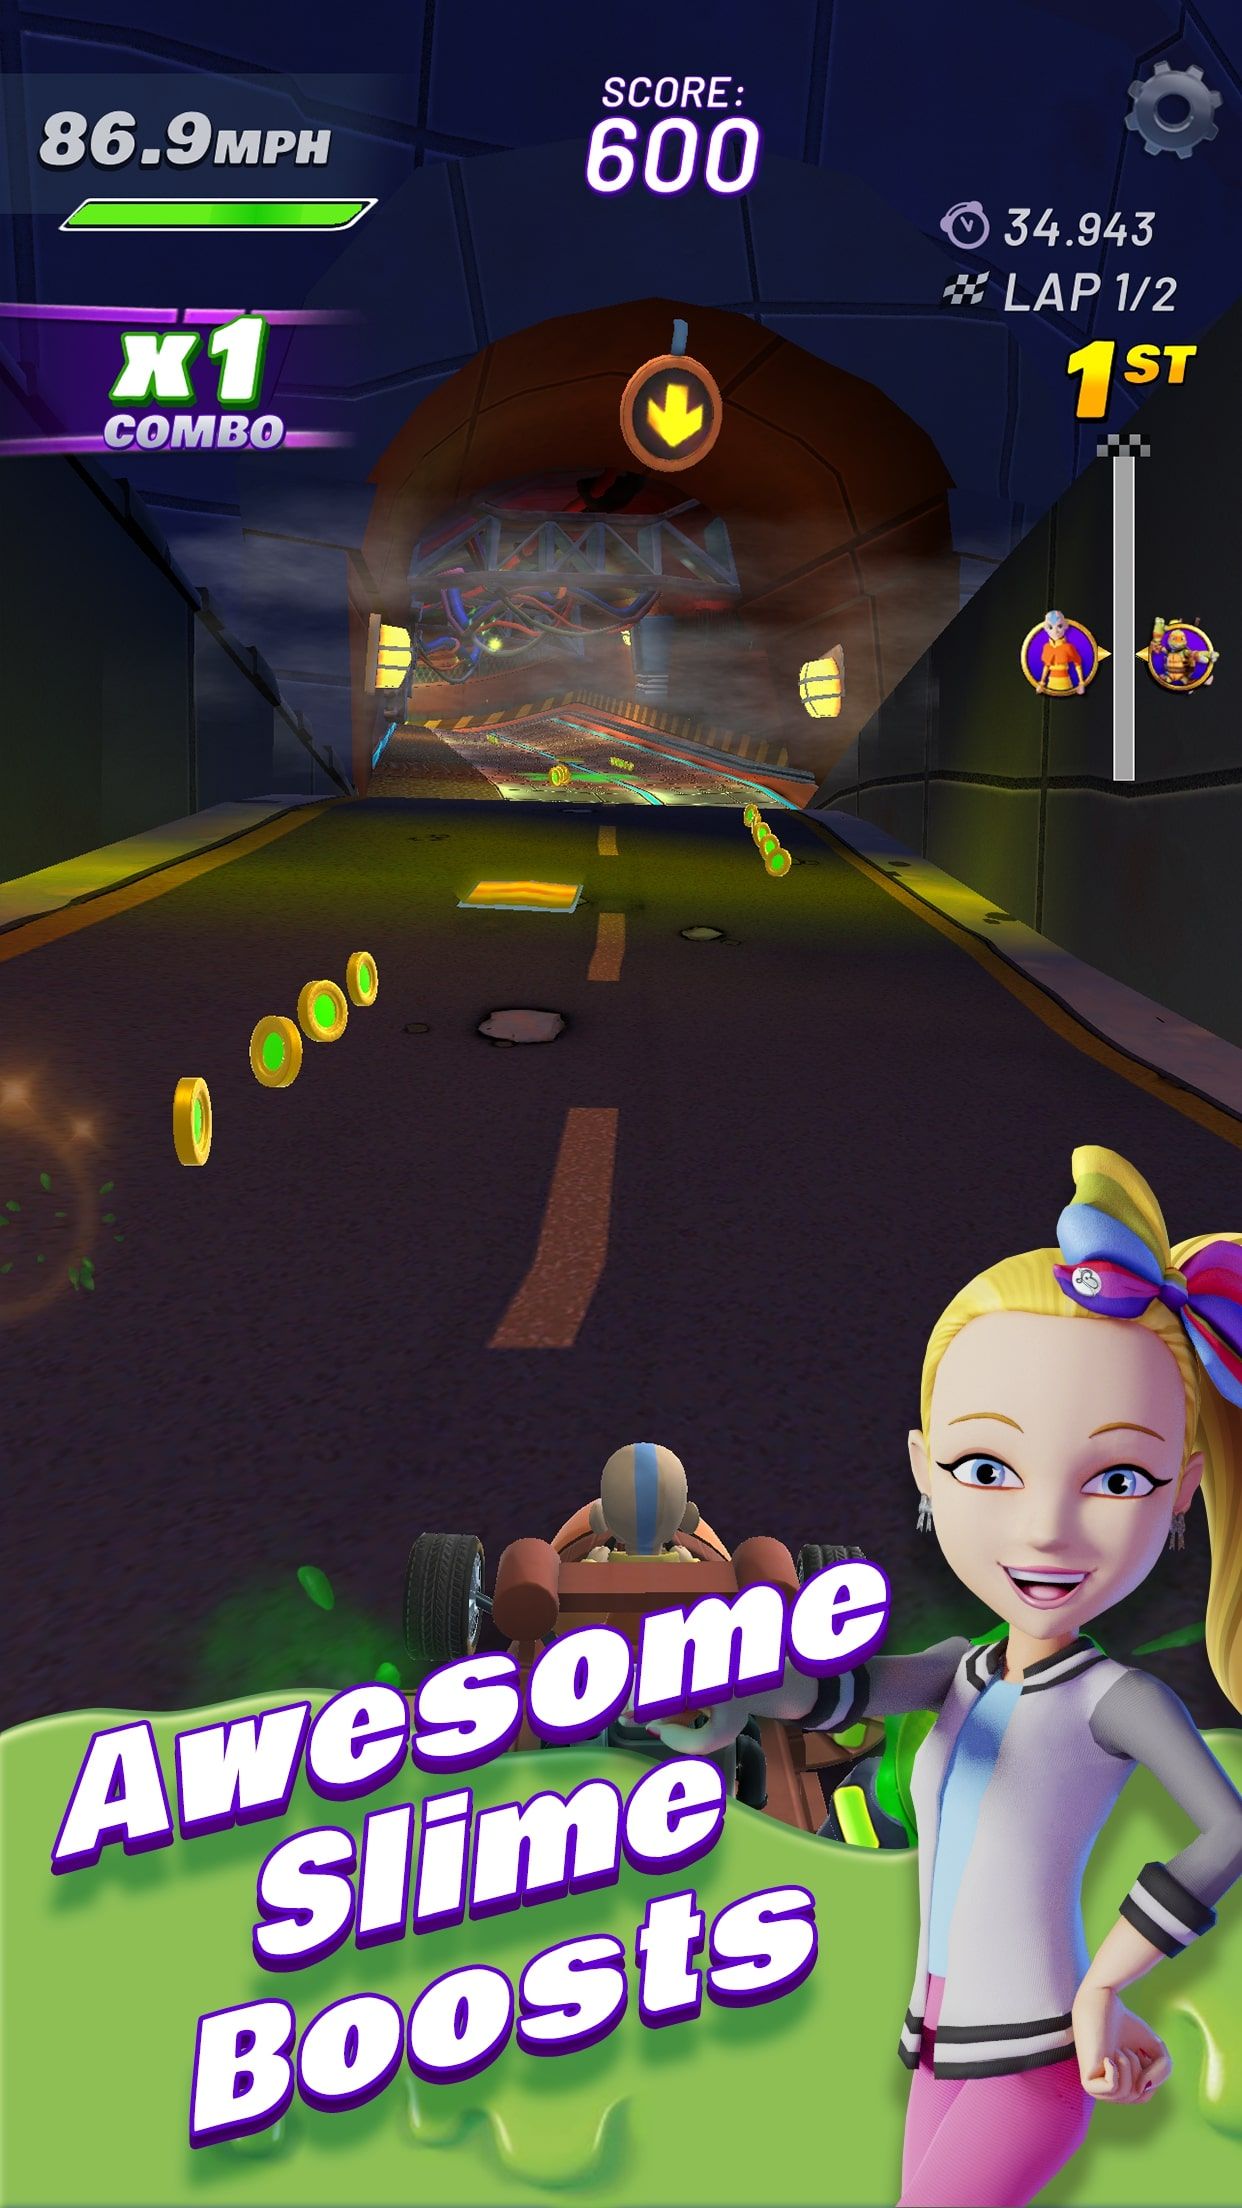 android-mario-kart-games-nickelodeon-kart-racers-awesome-slime-boosts